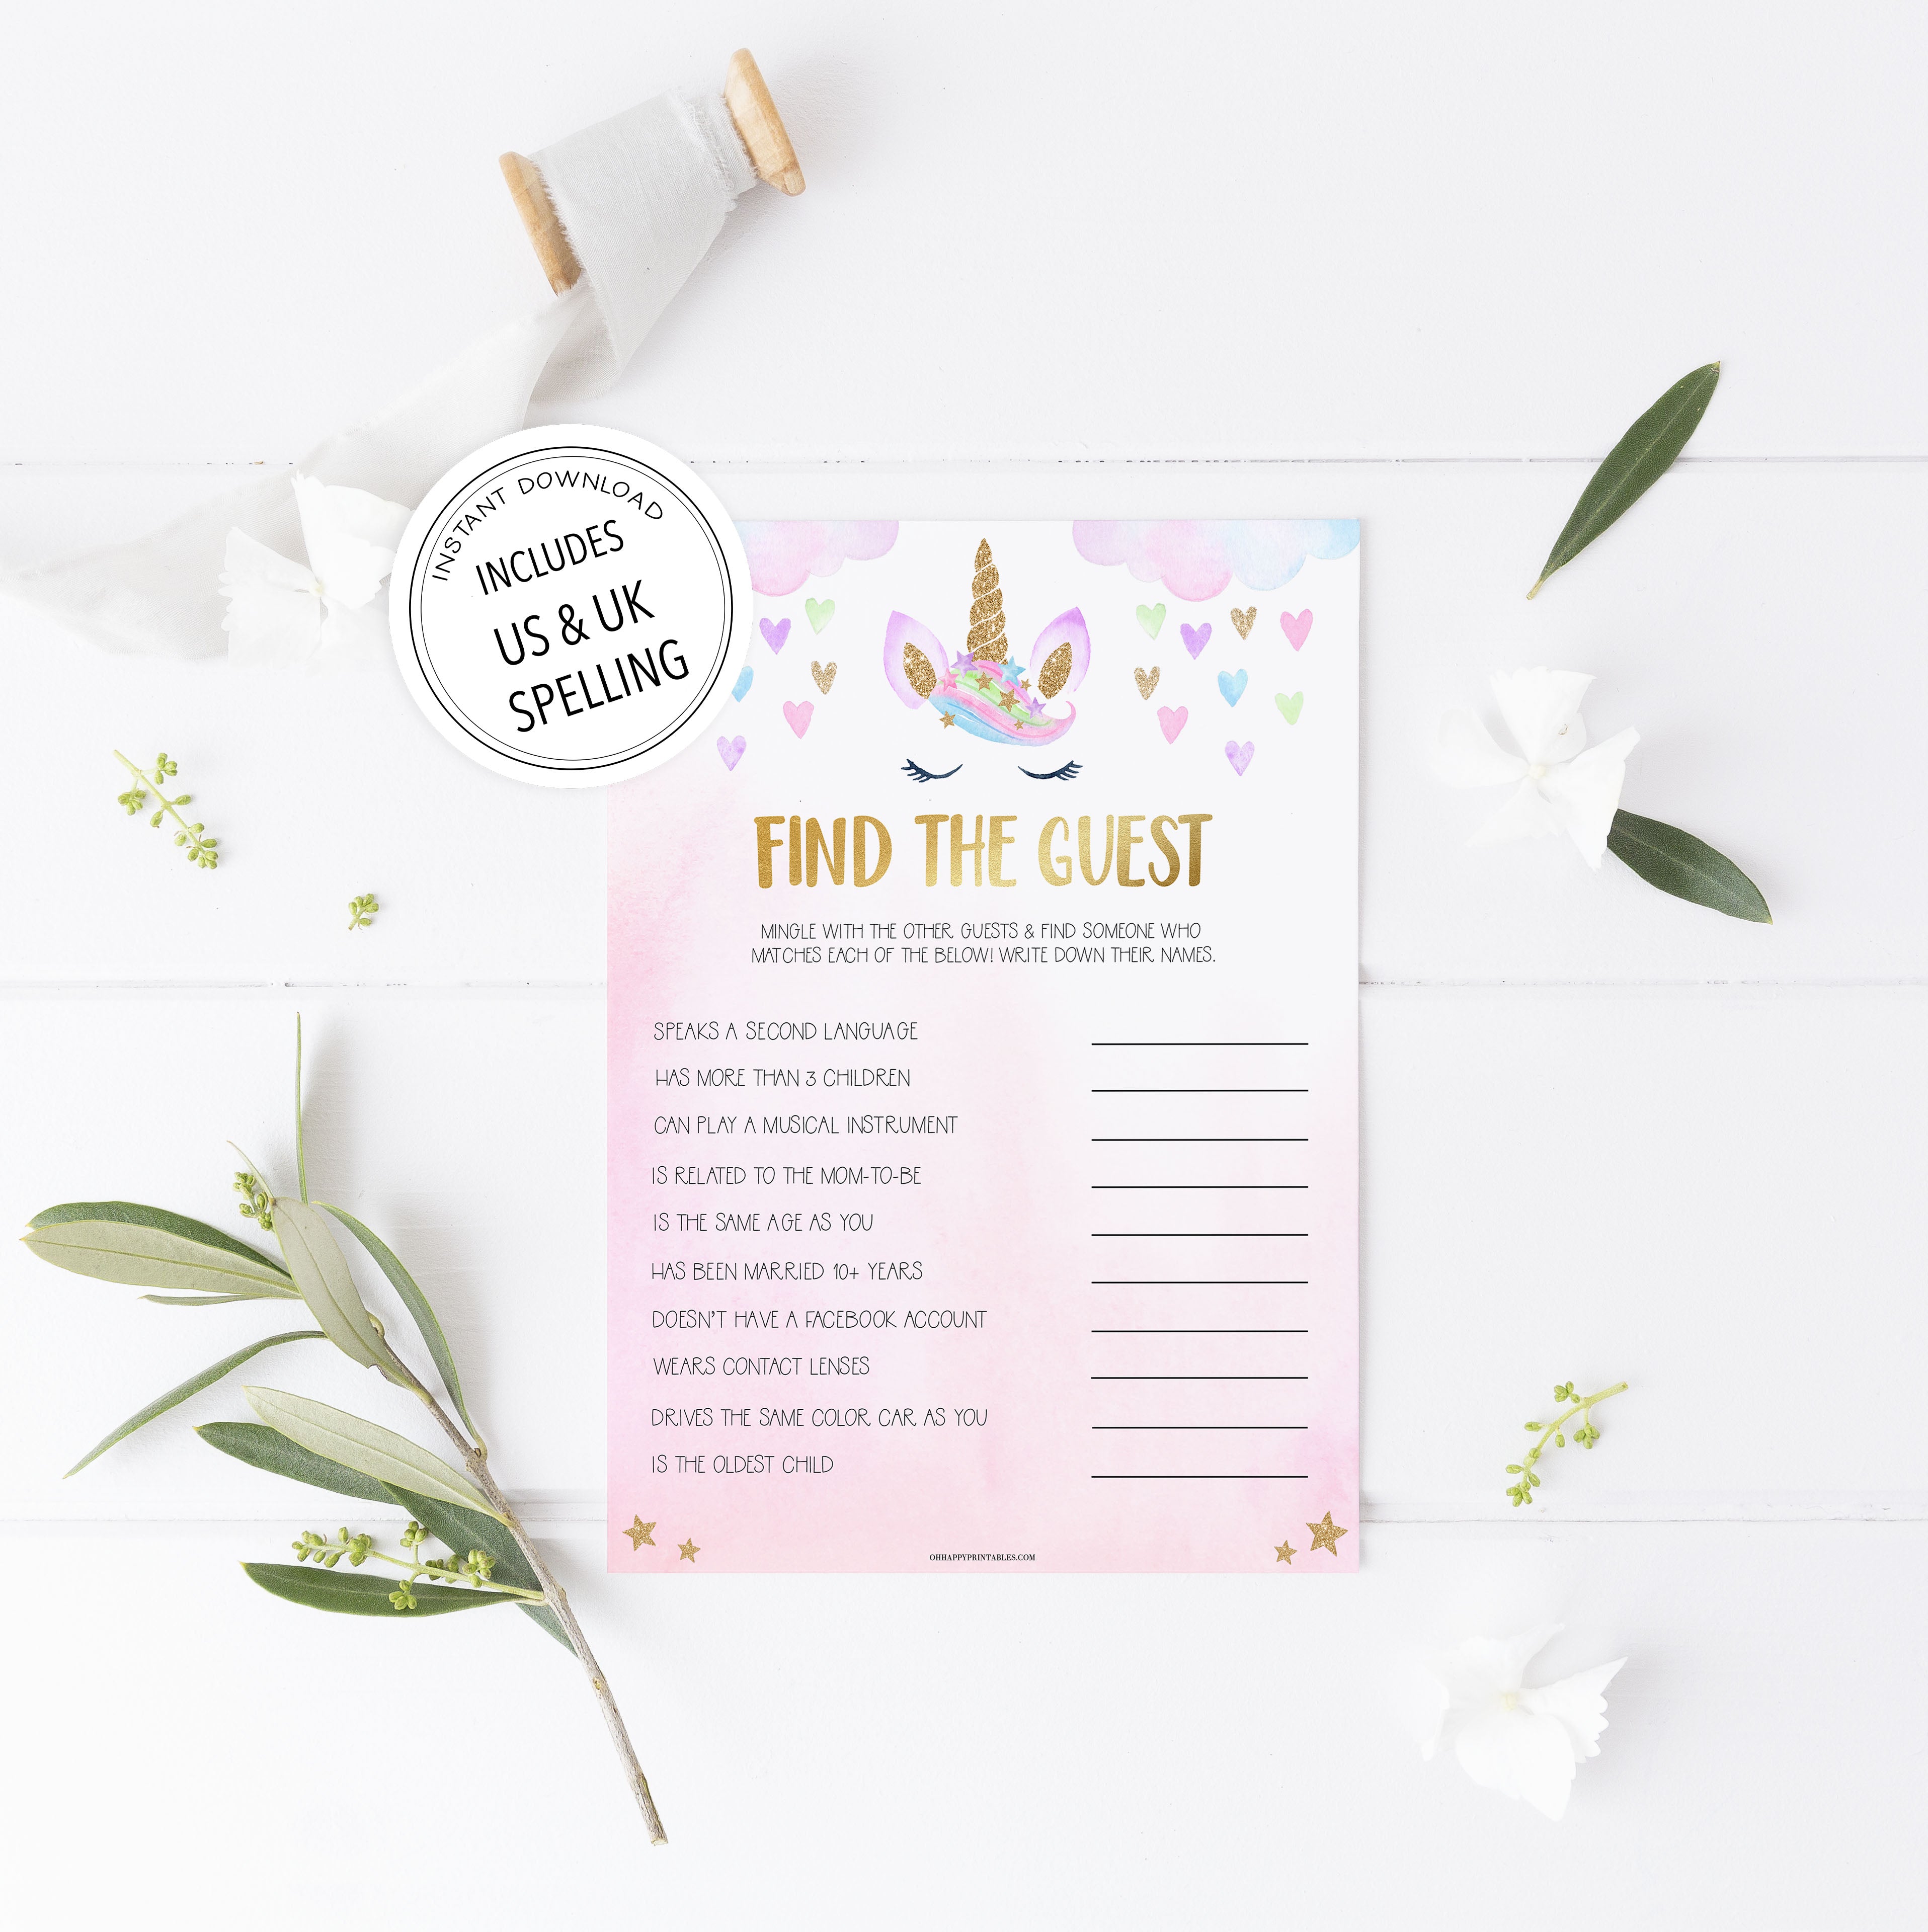 find the guest baby games, Printable baby shower games, unicorn baby games, baby shower games, fun baby shower ideas, top baby shower ideas, unicorn baby shower, baby shower games, fun unicorn baby shower ideas